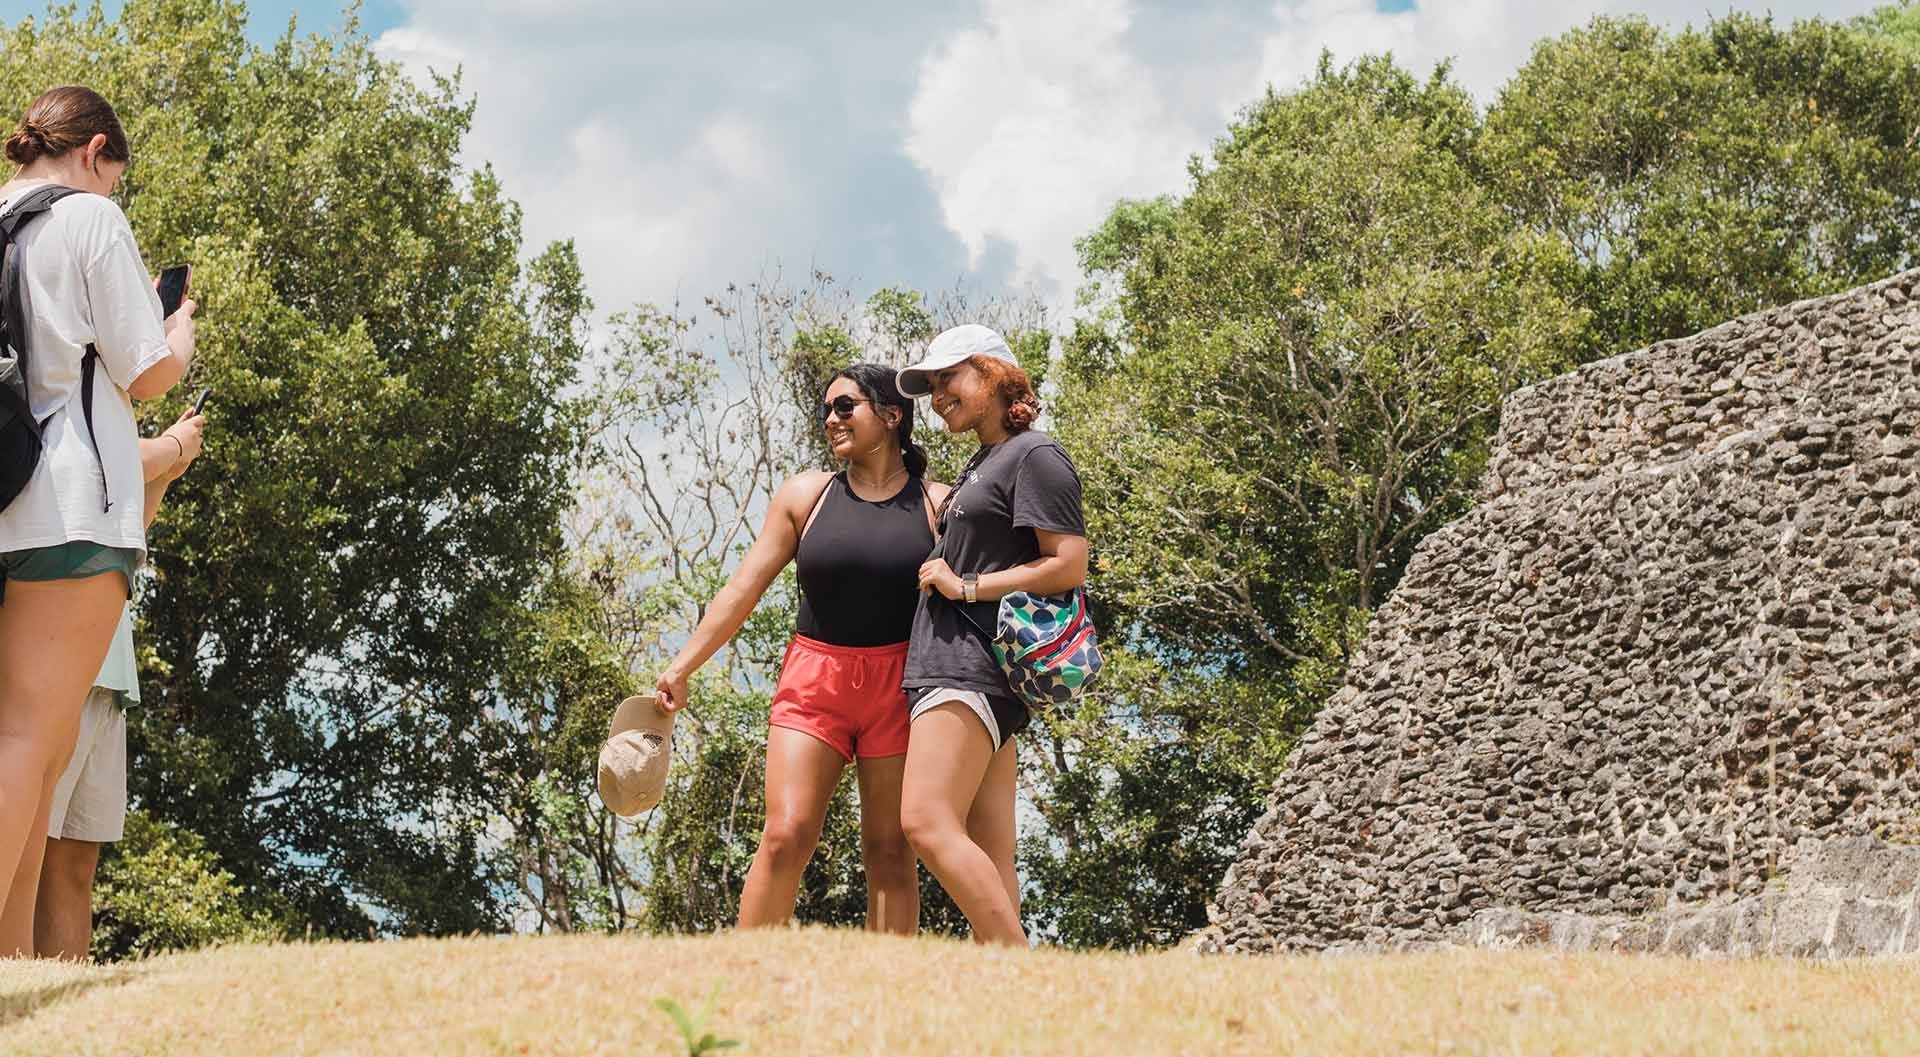 UGA Pre-Med Students at Xuanantunich Archaeological Reserve in Belize